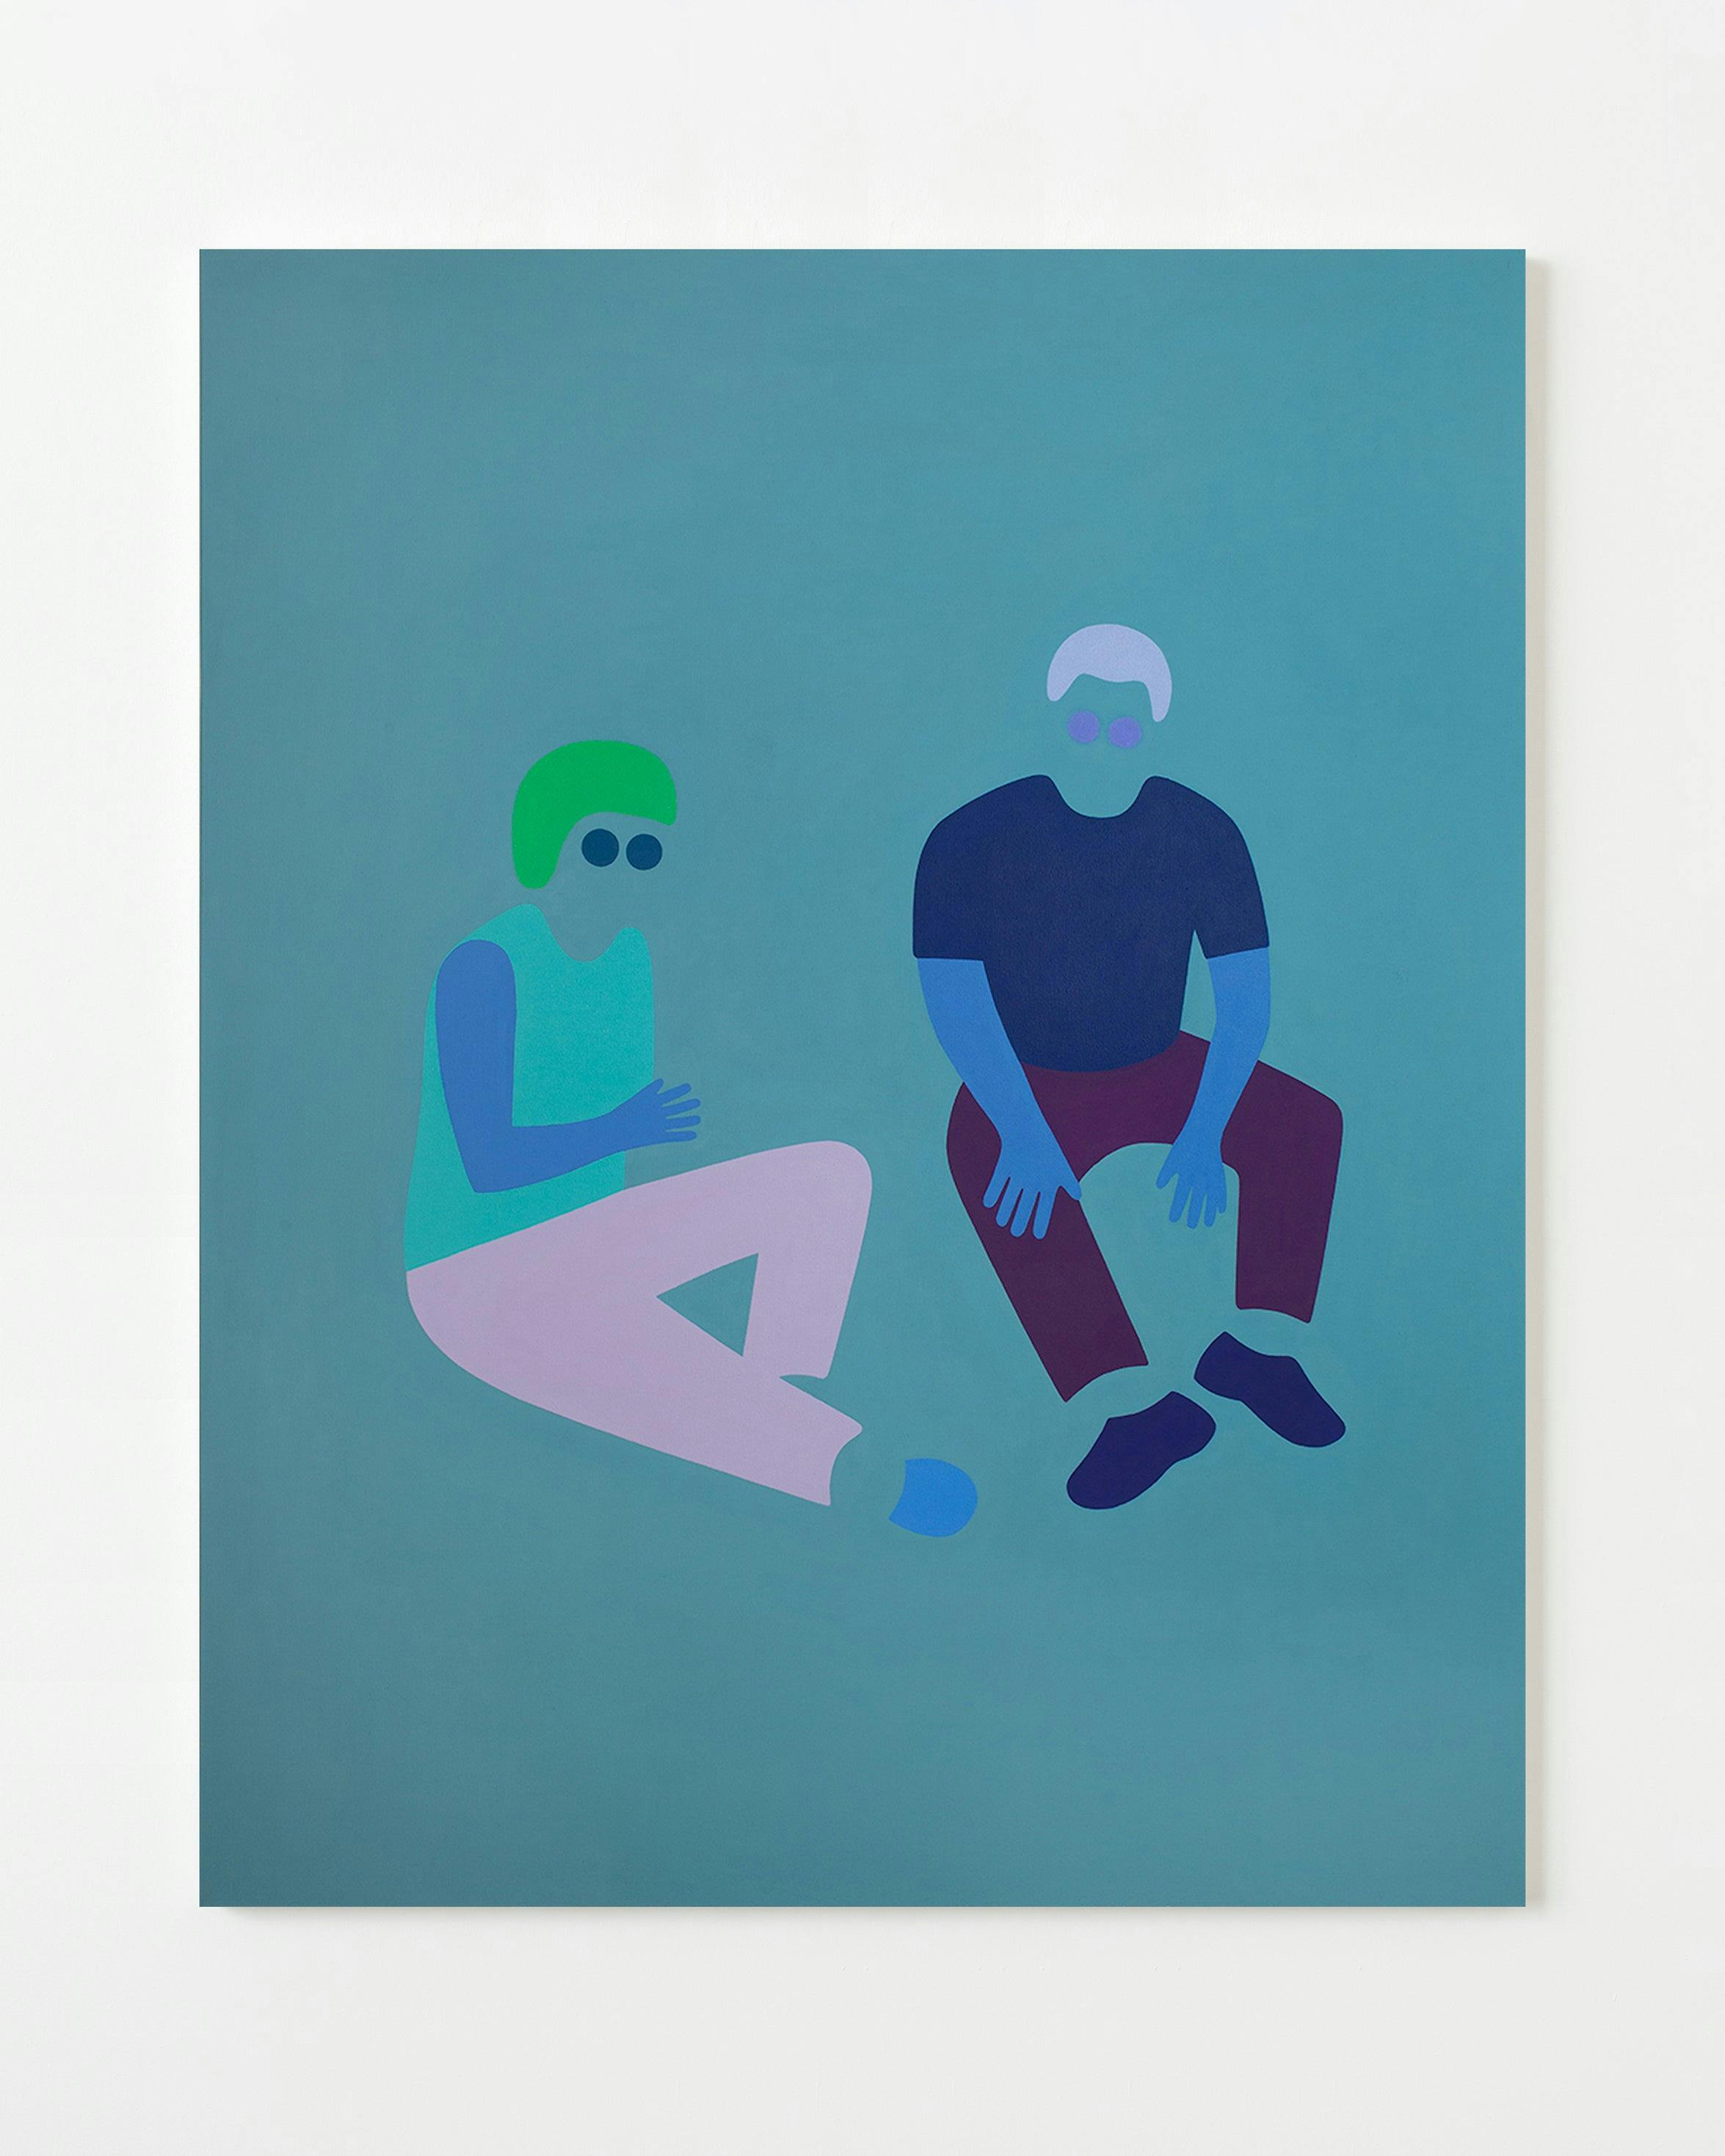 Painting by Dana Bell titled "Two Sitting on Ground (Blue and Pink)".